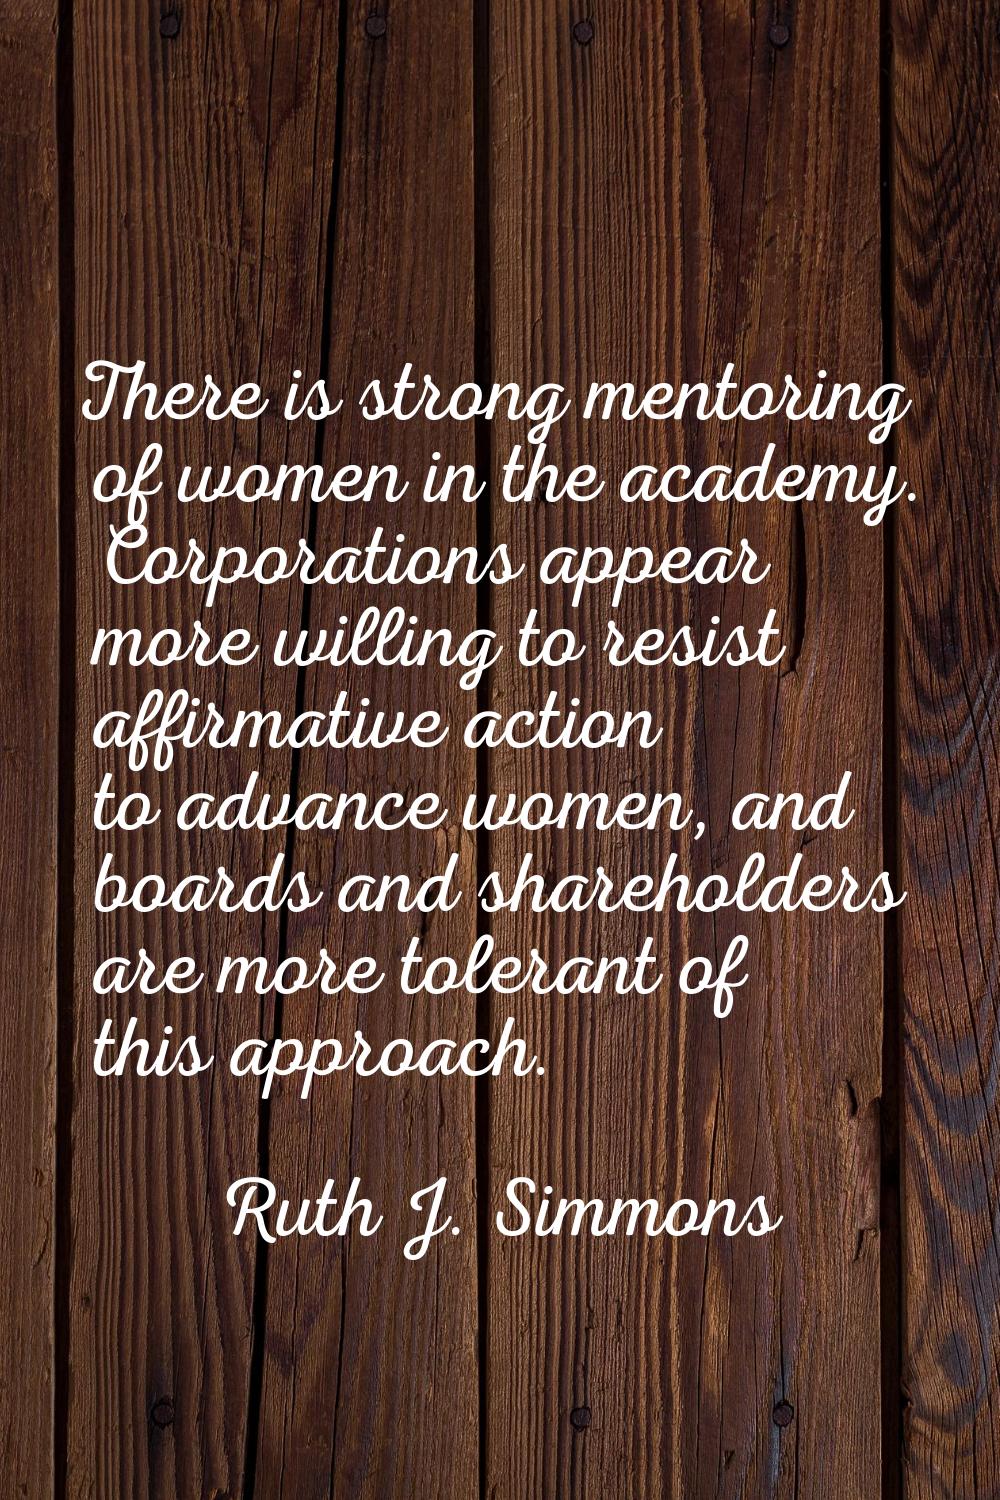 There is strong mentoring of women in the academy. Corporations appear more willing to resist affir